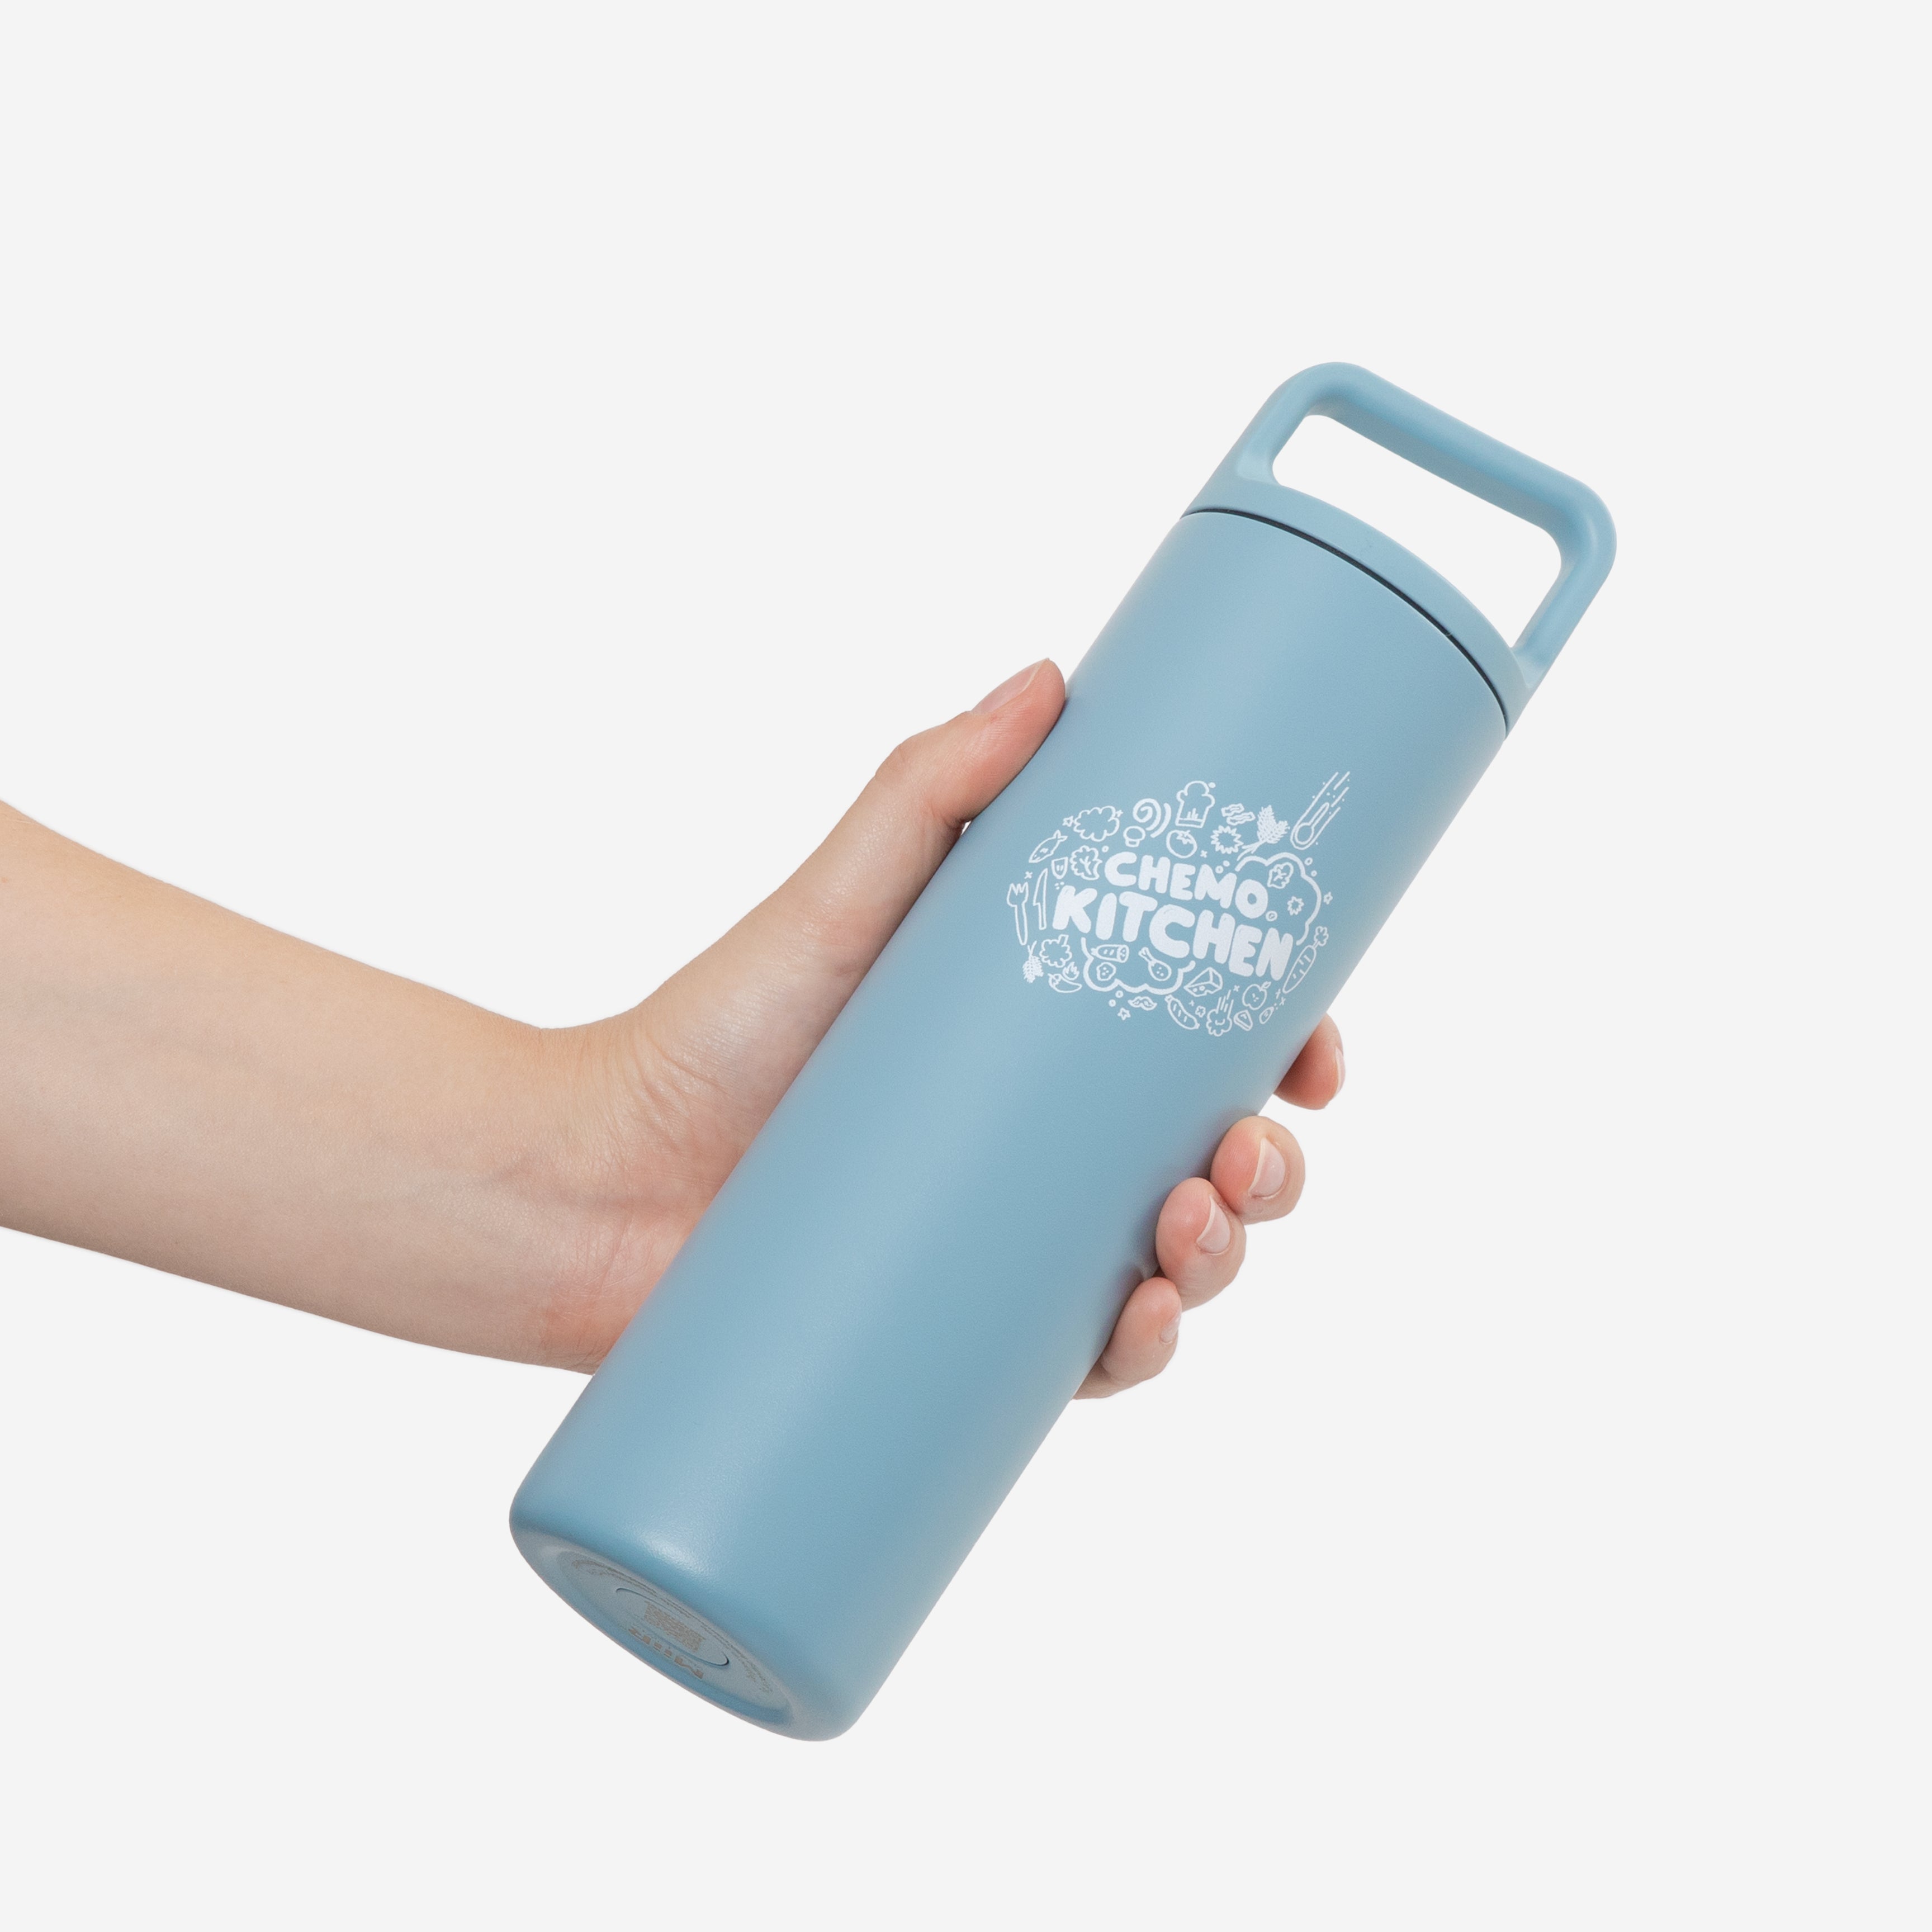 MiiR 20-oz. White Wide-Mouth Water Bottle